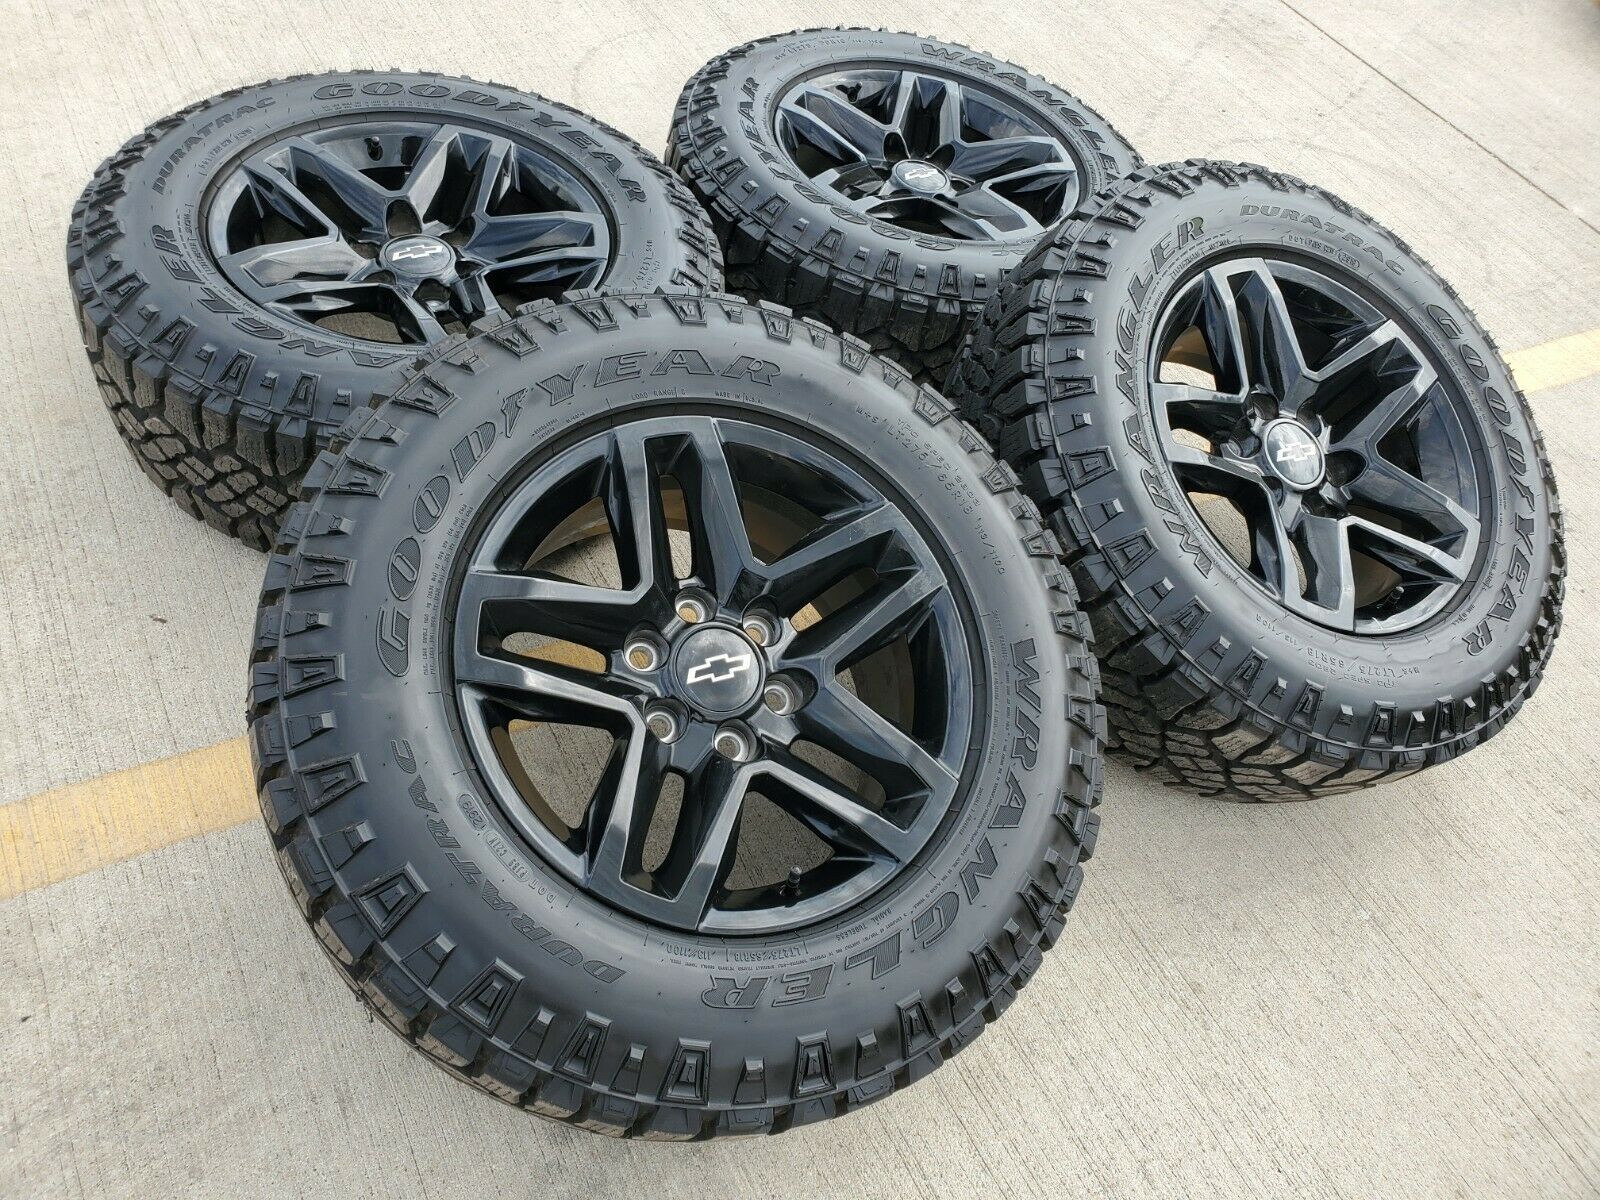 2021 Chevy Trail Boss Tire Size Titus Bonser